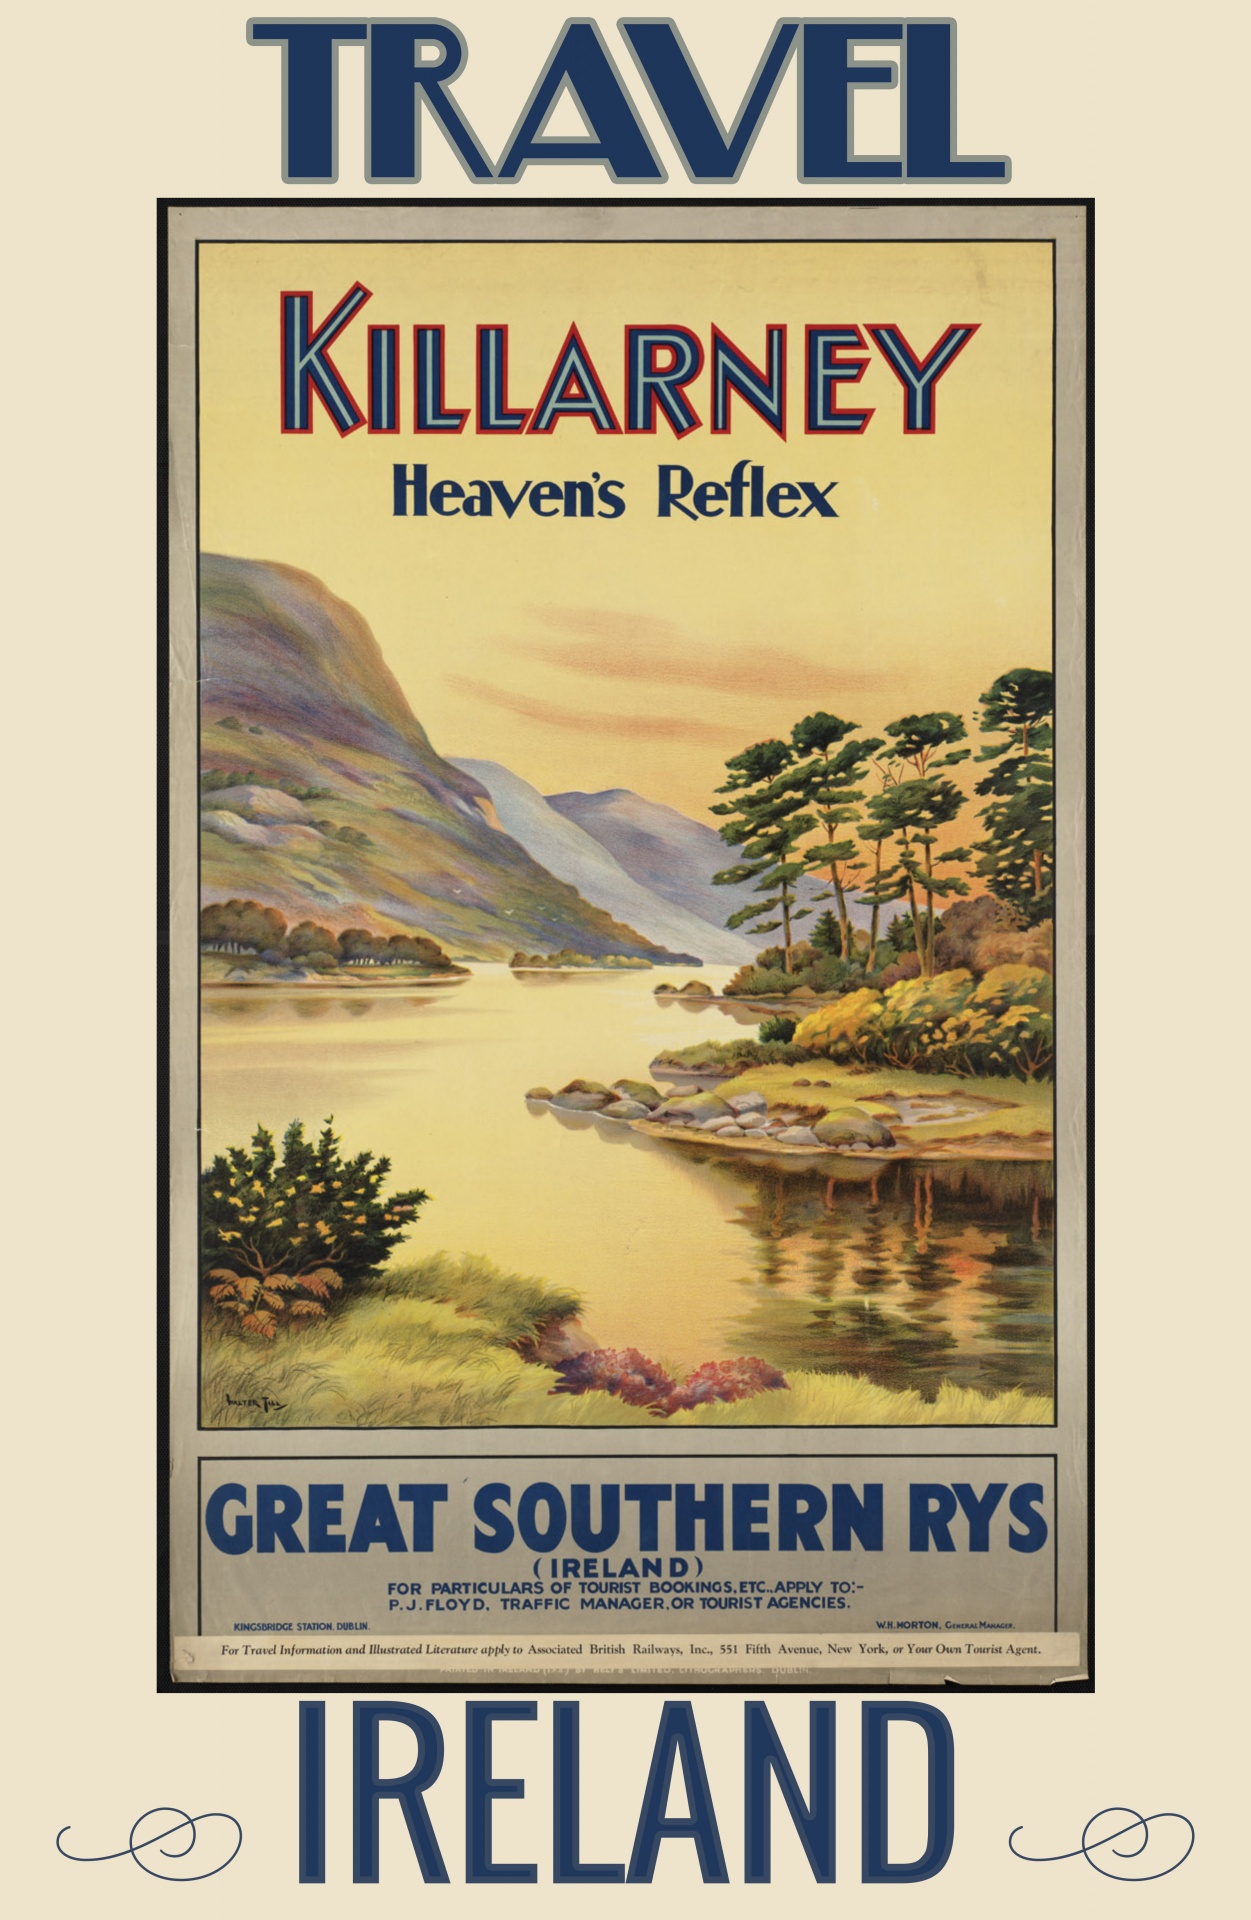 Travel poster for Ireland, vintage style